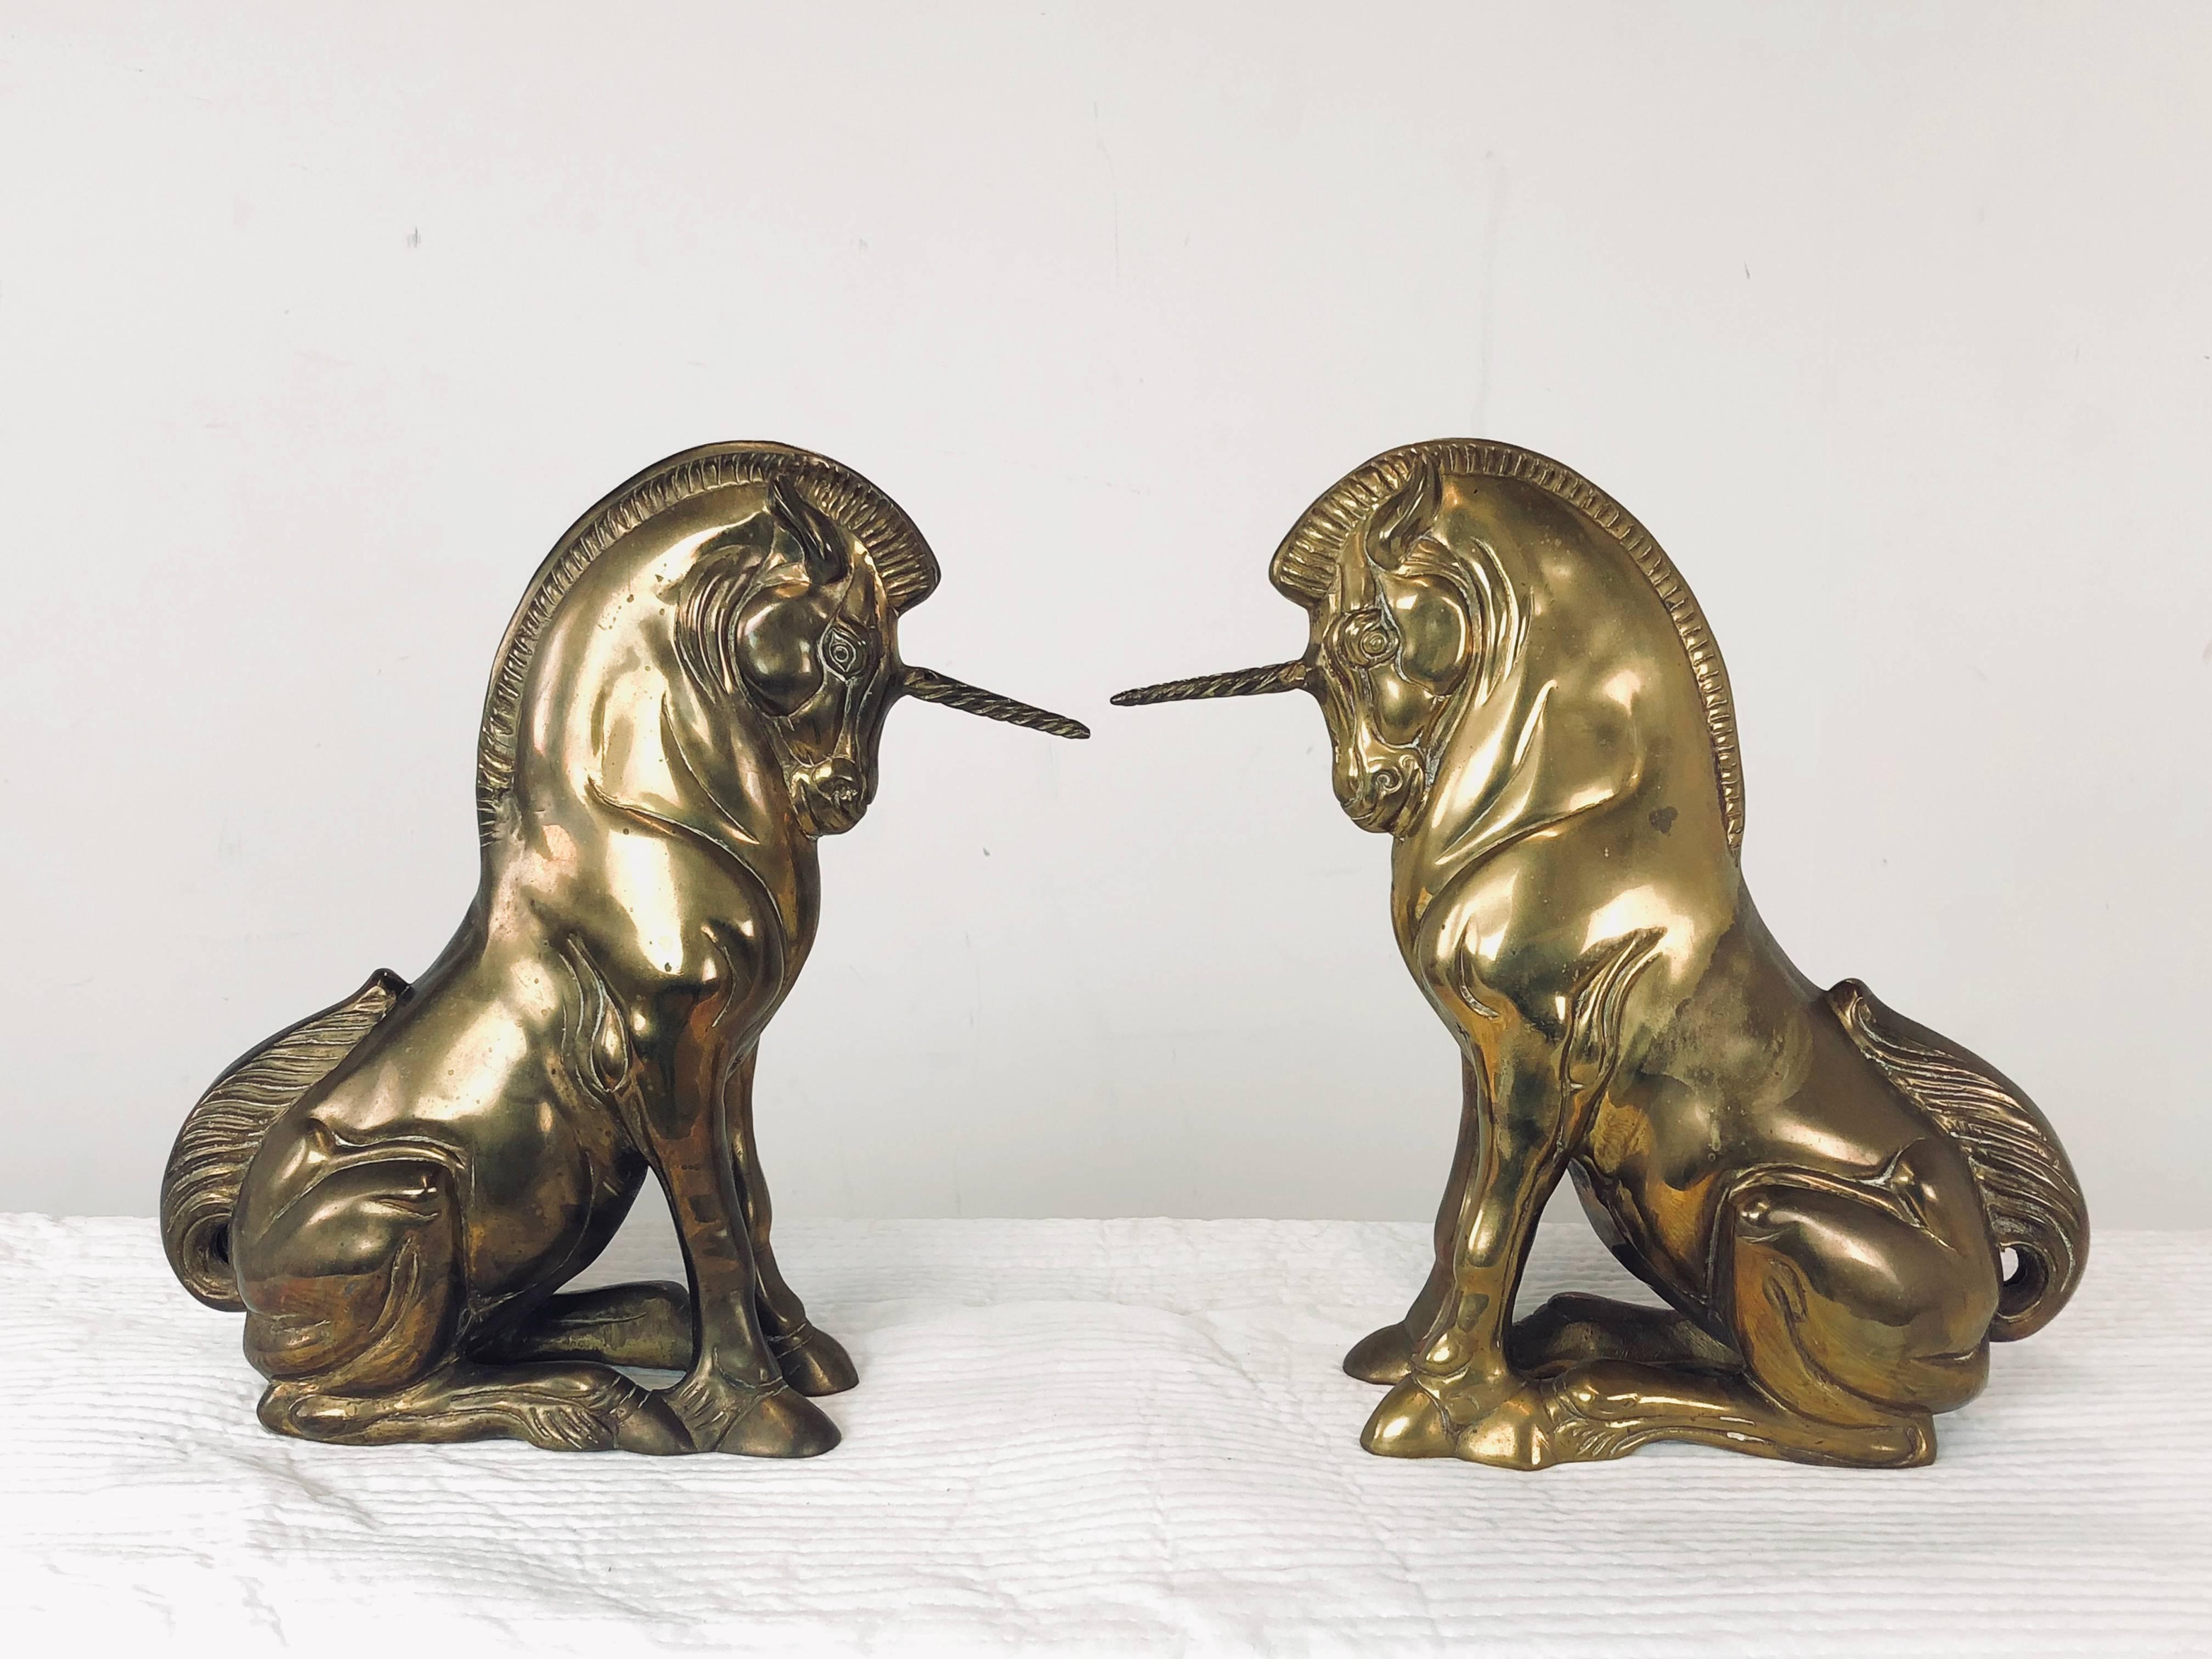 Pair of vintage brass unicorn statues. These statues have a nice aged patina to them, circa 1960s

Dimensions: 14